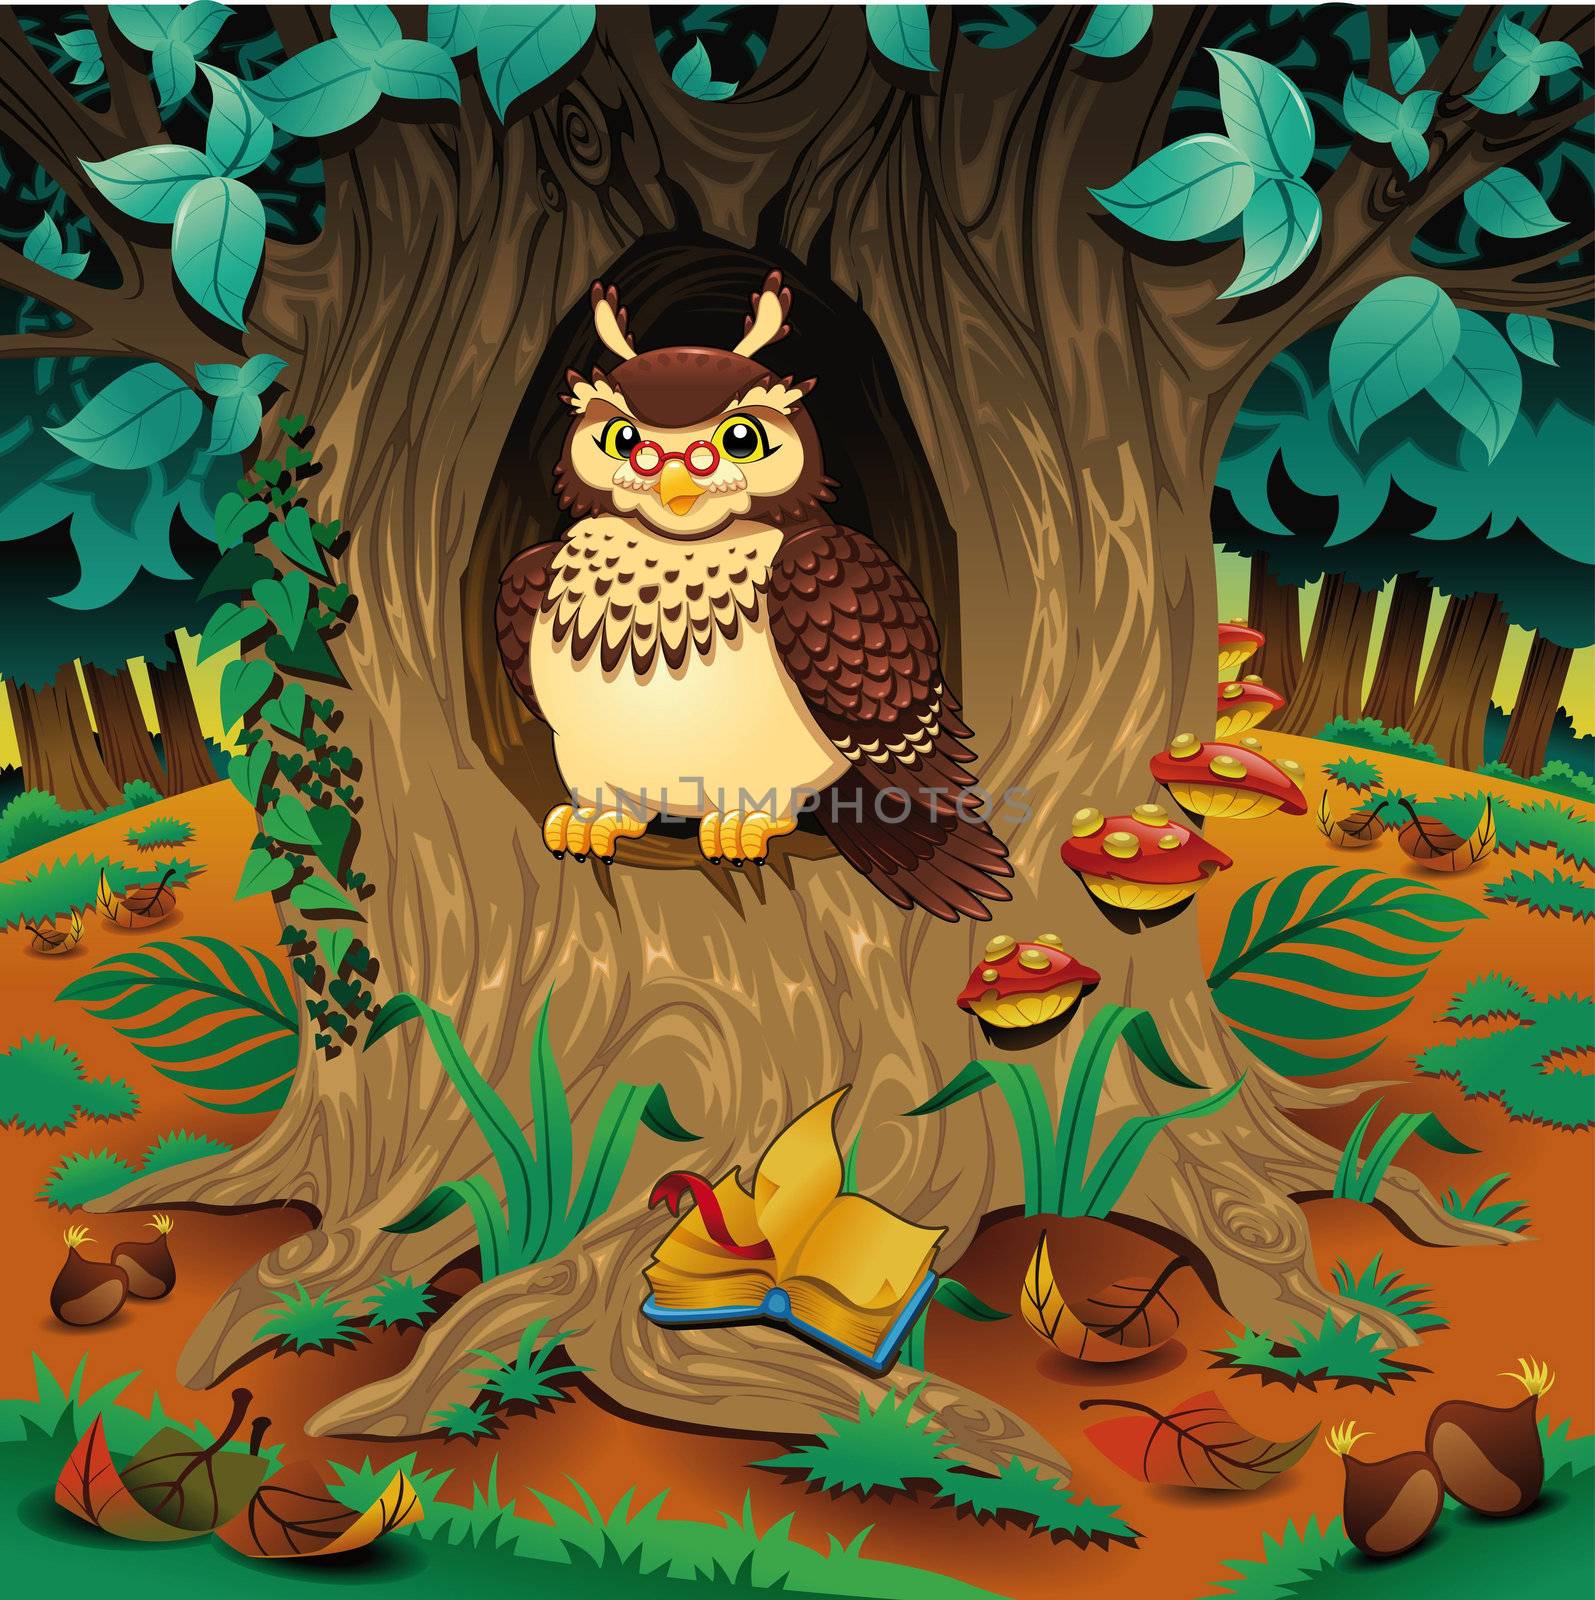 Scene with owl. Cartoon and vector illustration. Scene with owl. Cartoon and vector illustration.

